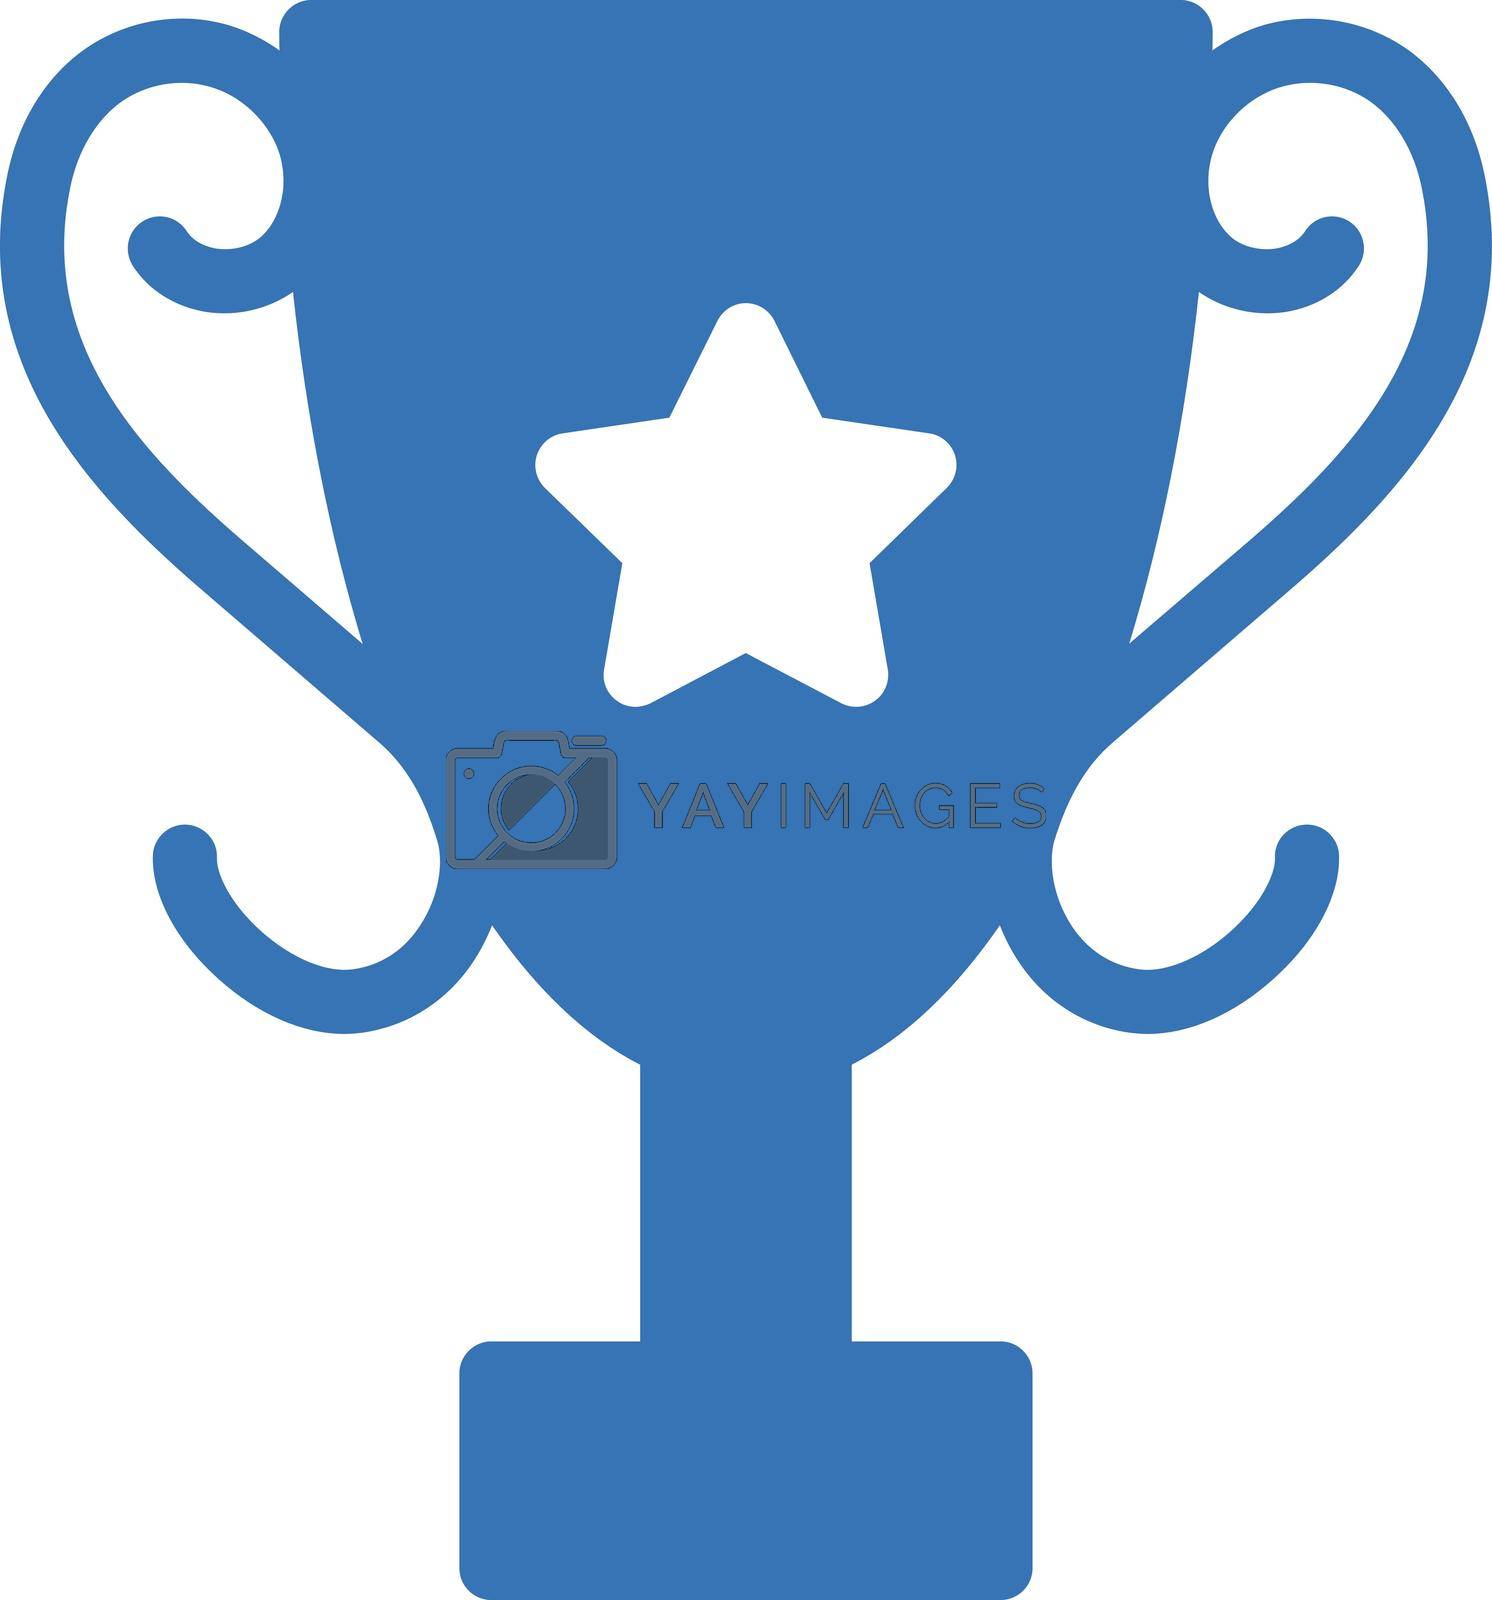 Royalty free image of trophy by vectorstall